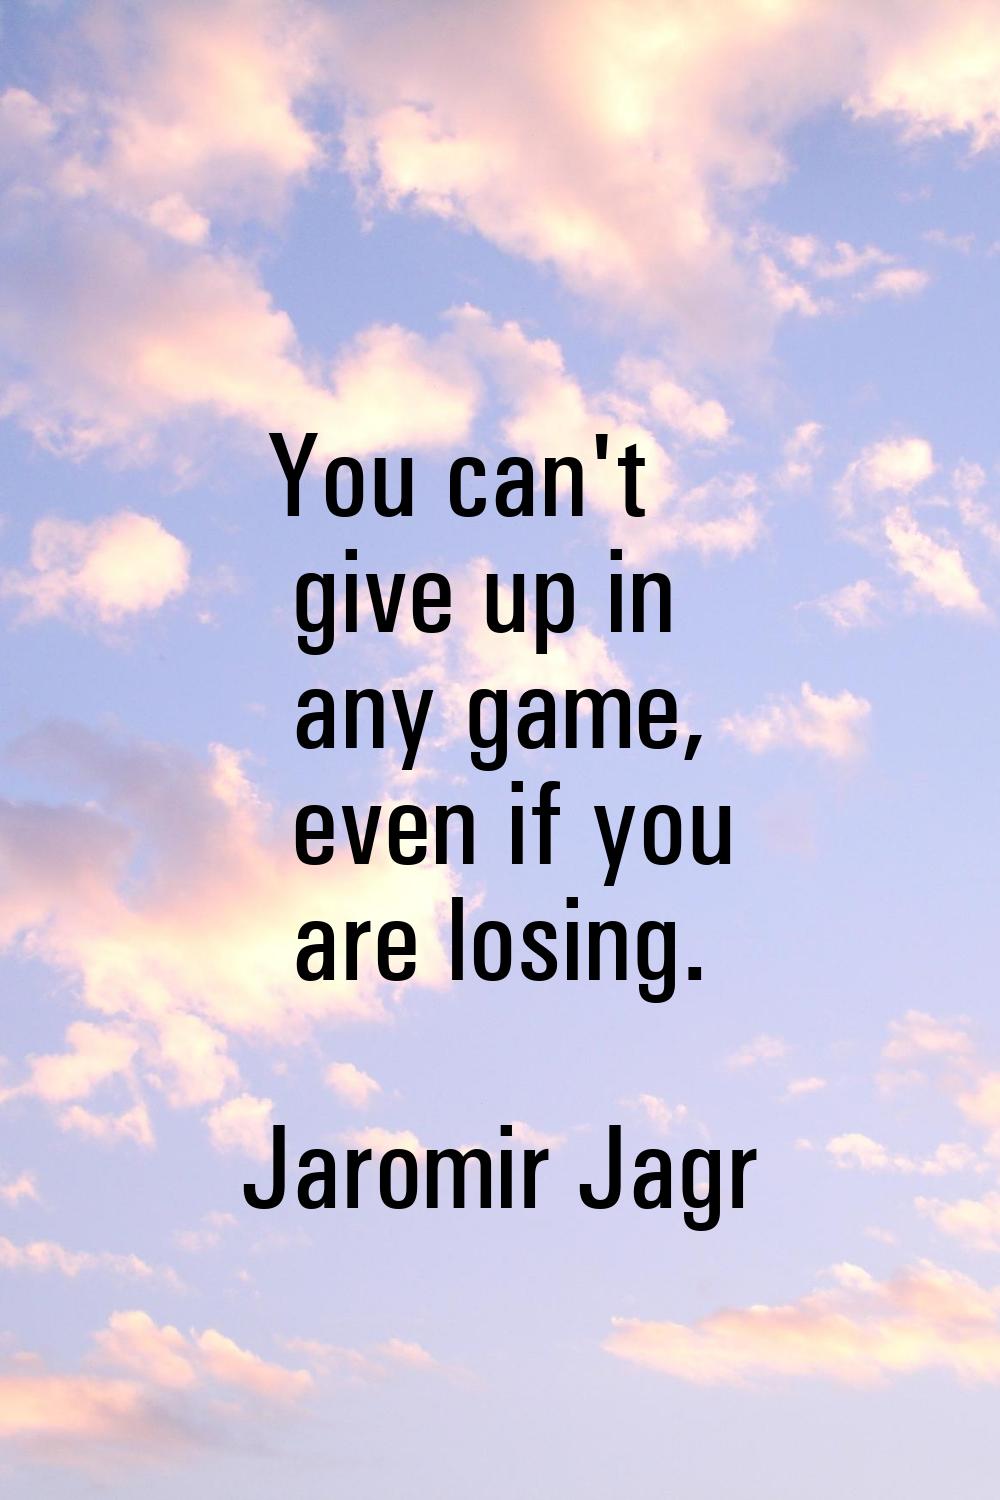 You can't give up in any game, even if you are losing.